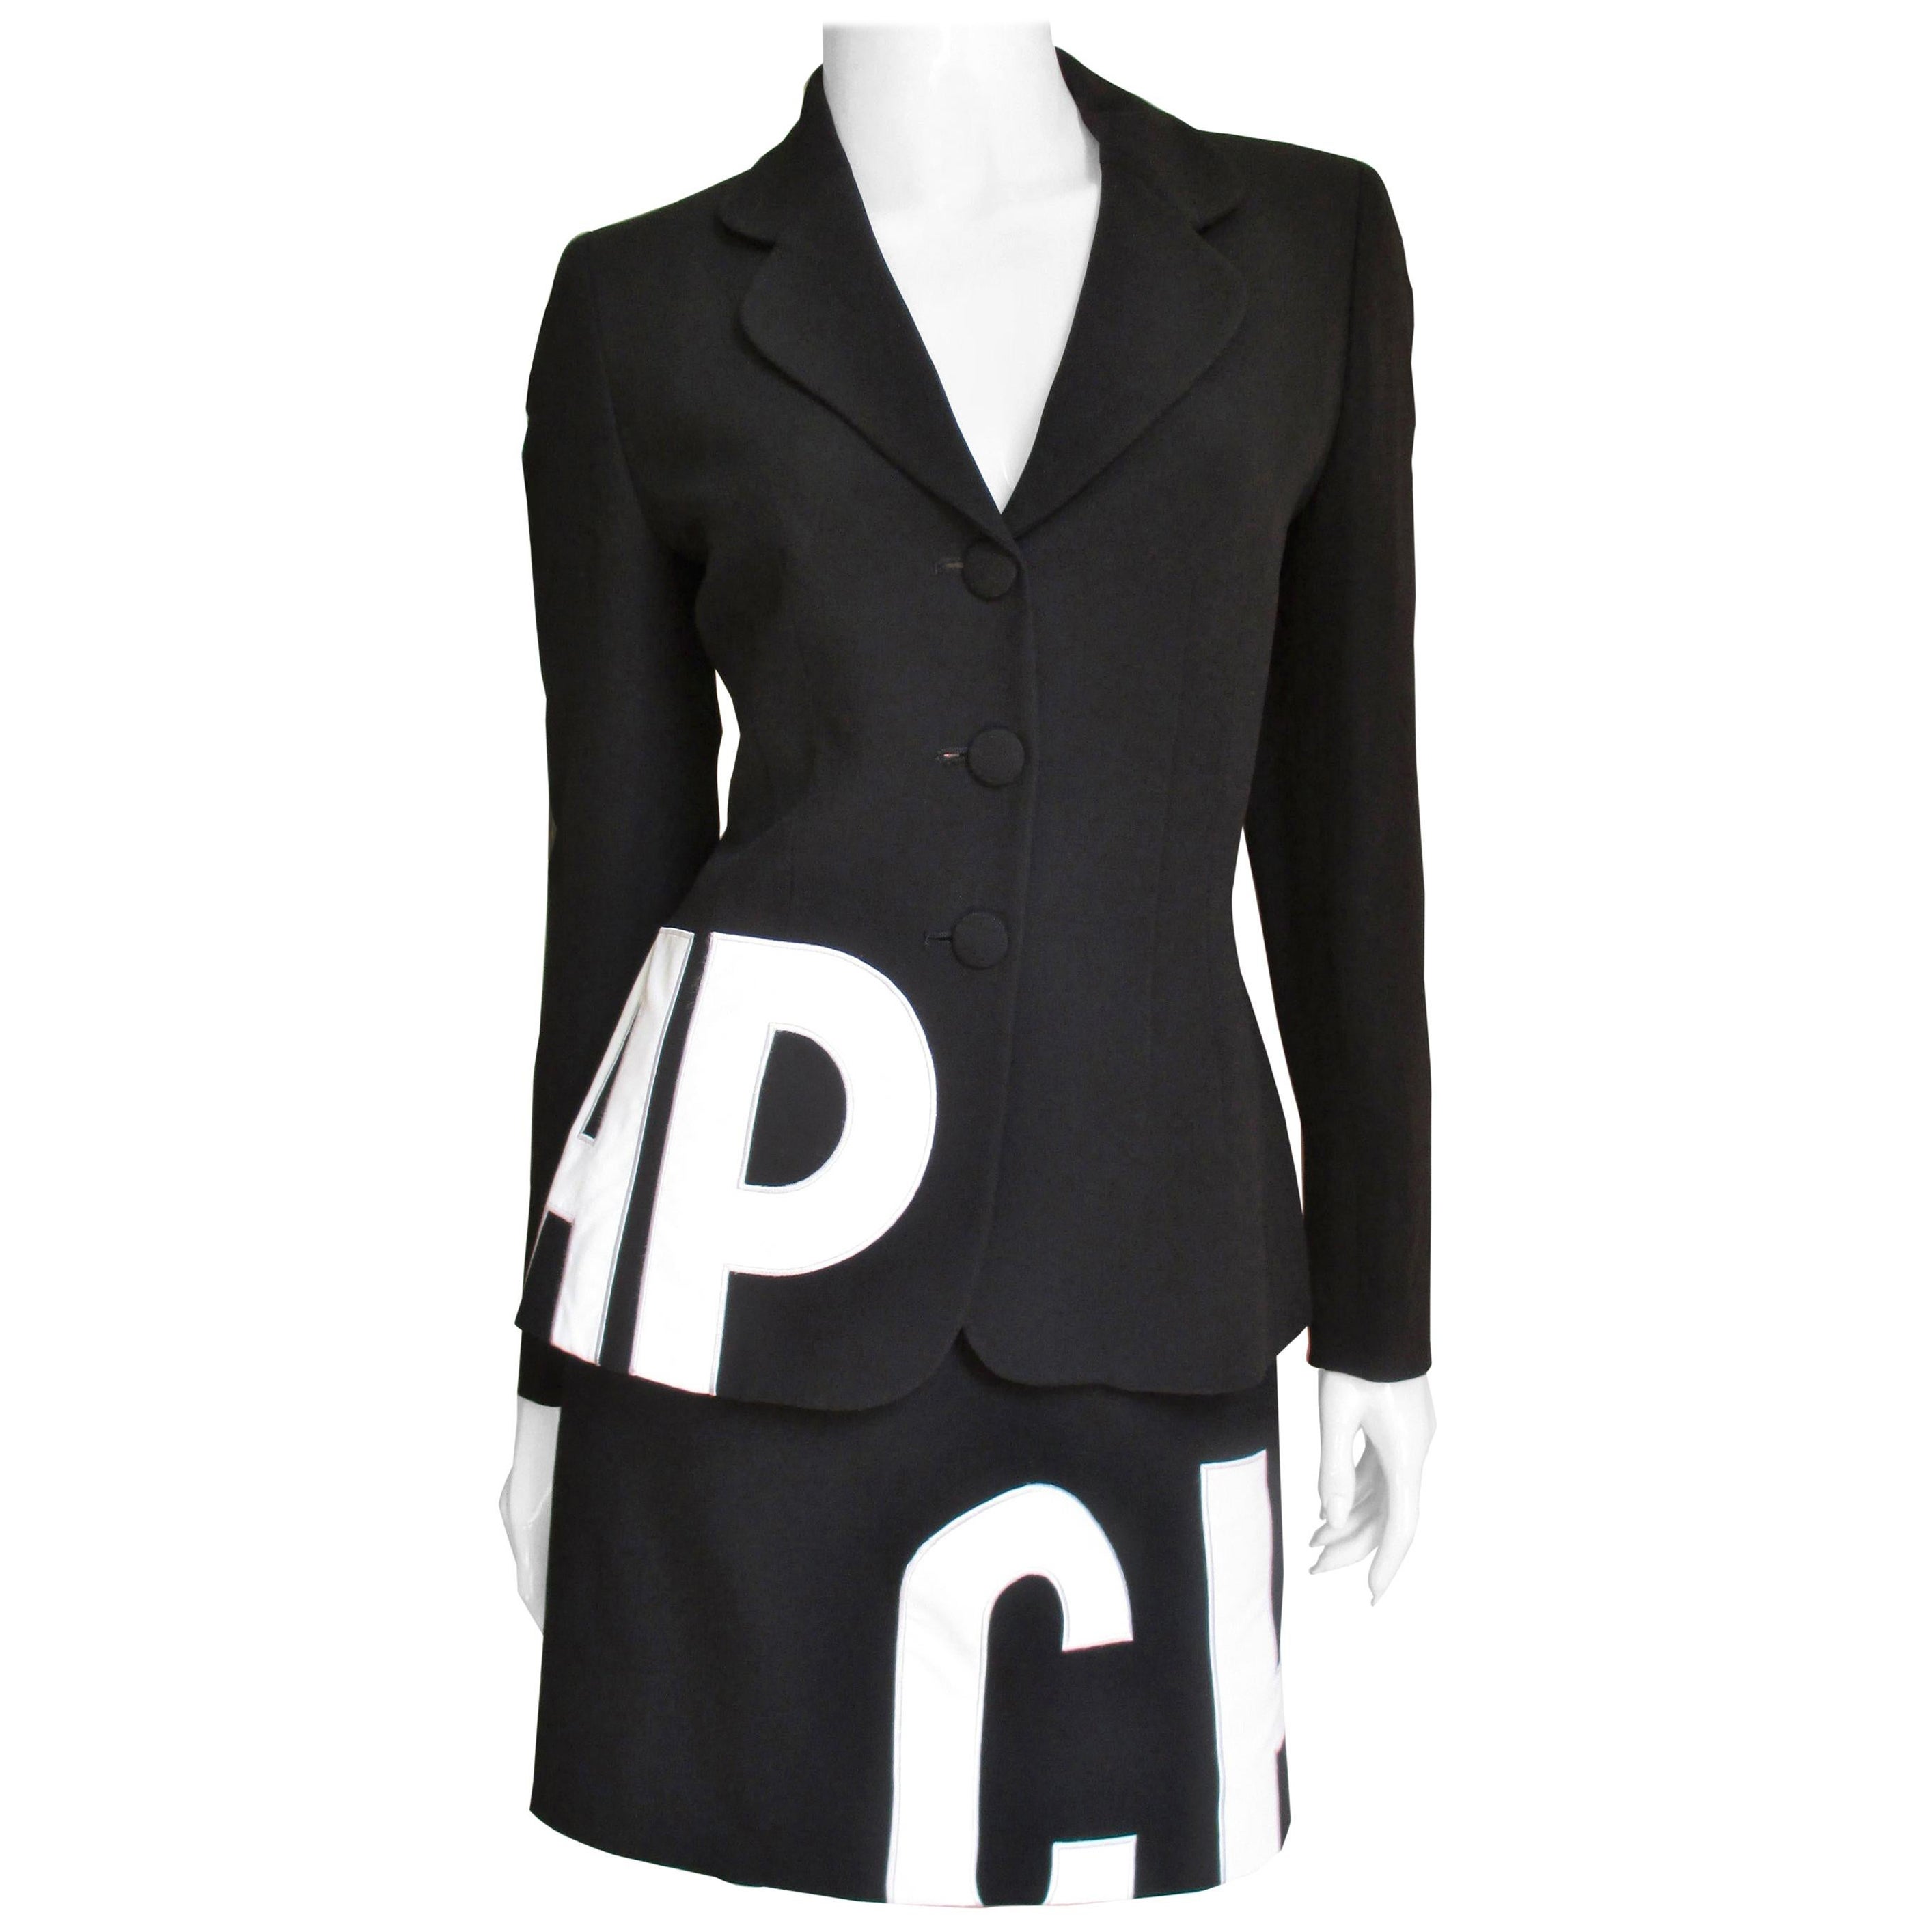  Moschino Letter Applique Skirt Suit